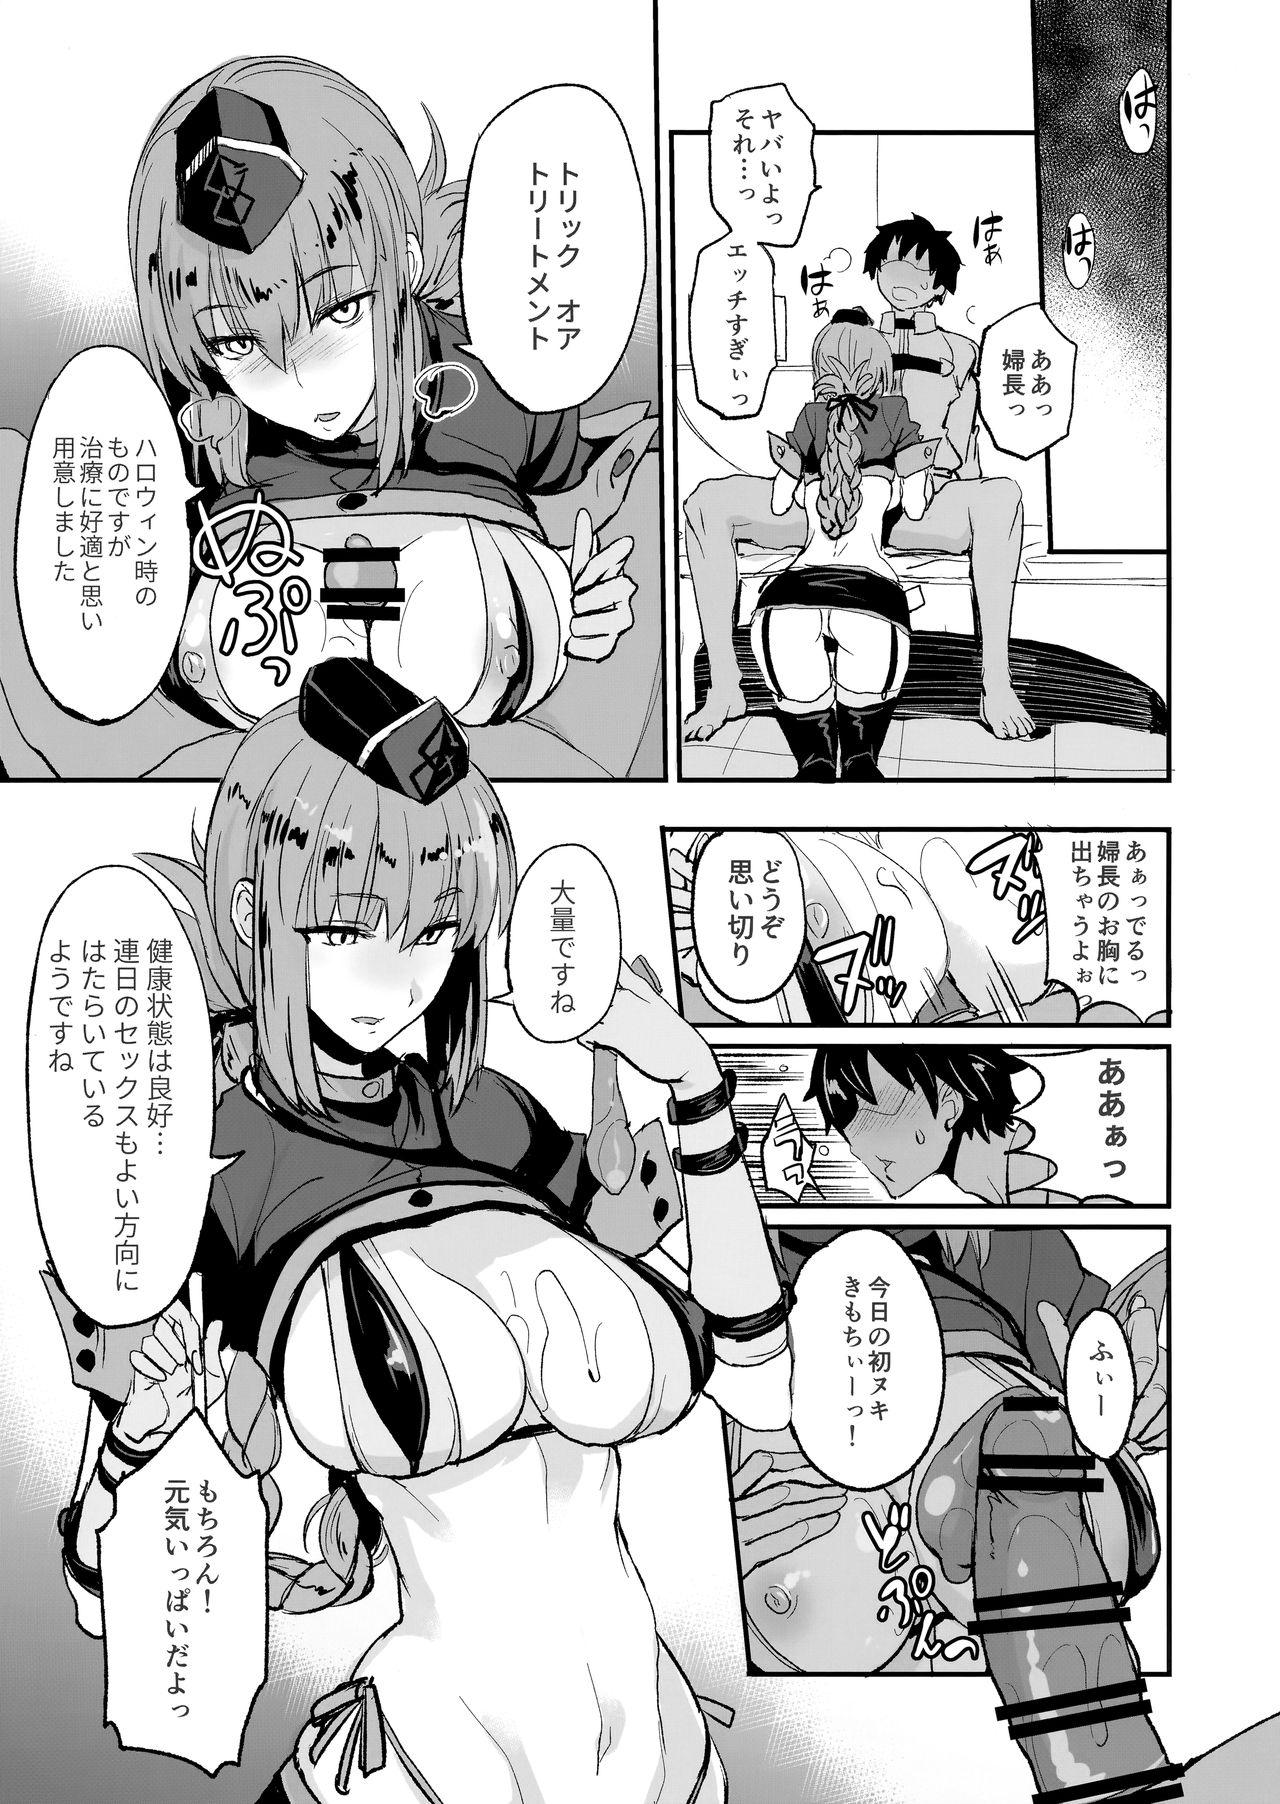 People Having Sex FGO no Erohon 2 - Fate grand order Best Blowjobs Ever - Page 4